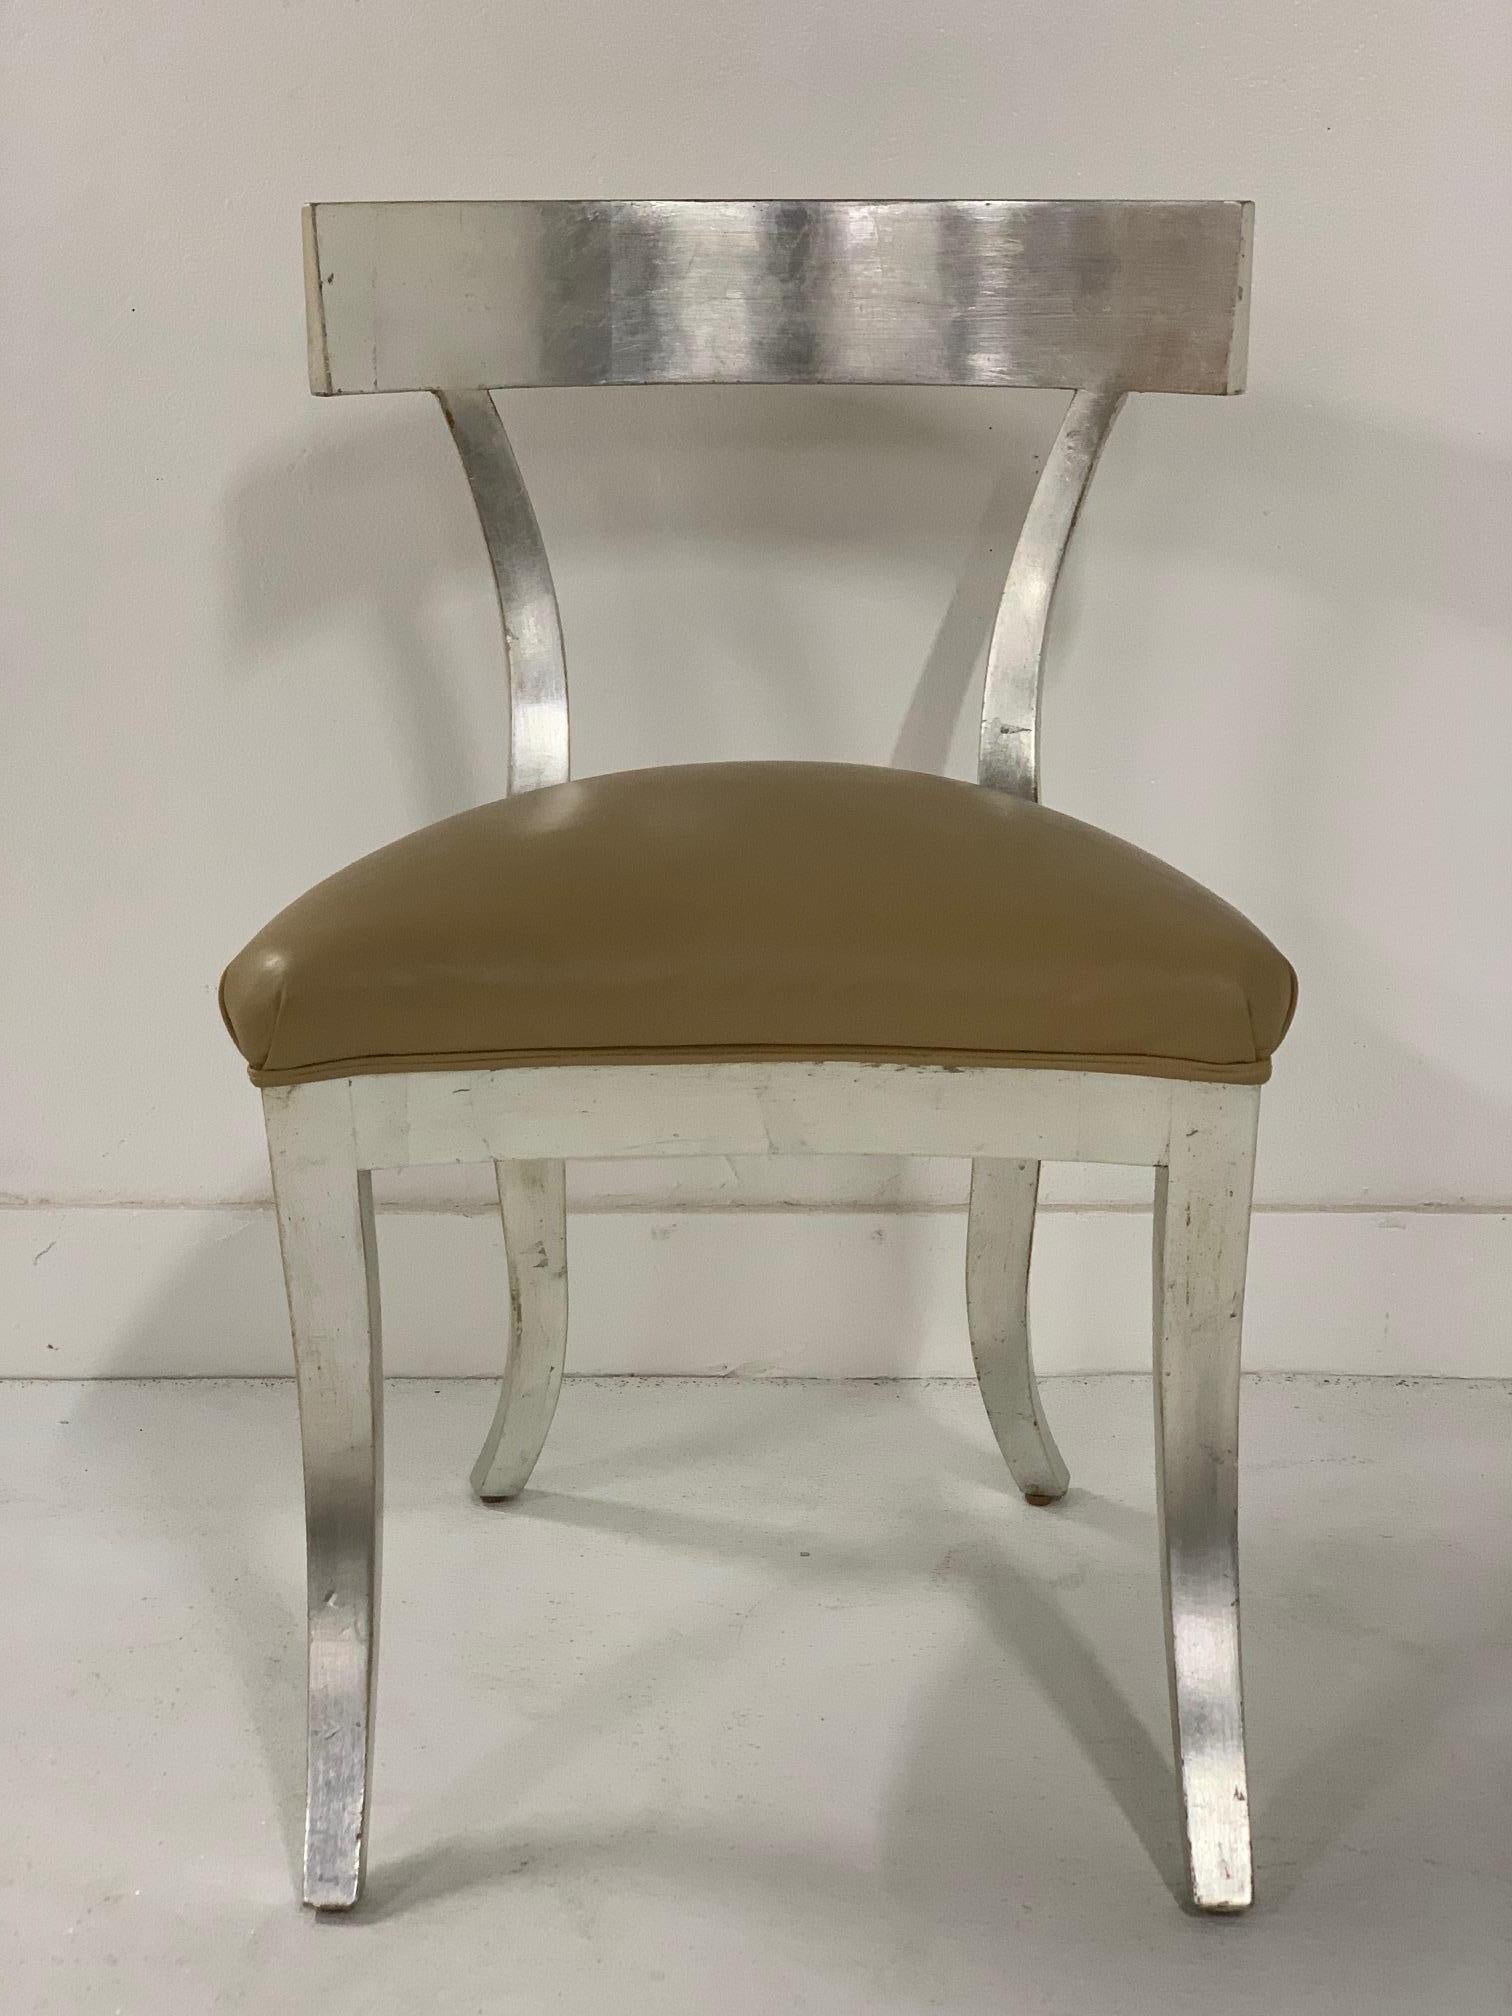 Silver gilt side chair style of Robsjohn-Gibbings. Has a leather seat and curved backrest.